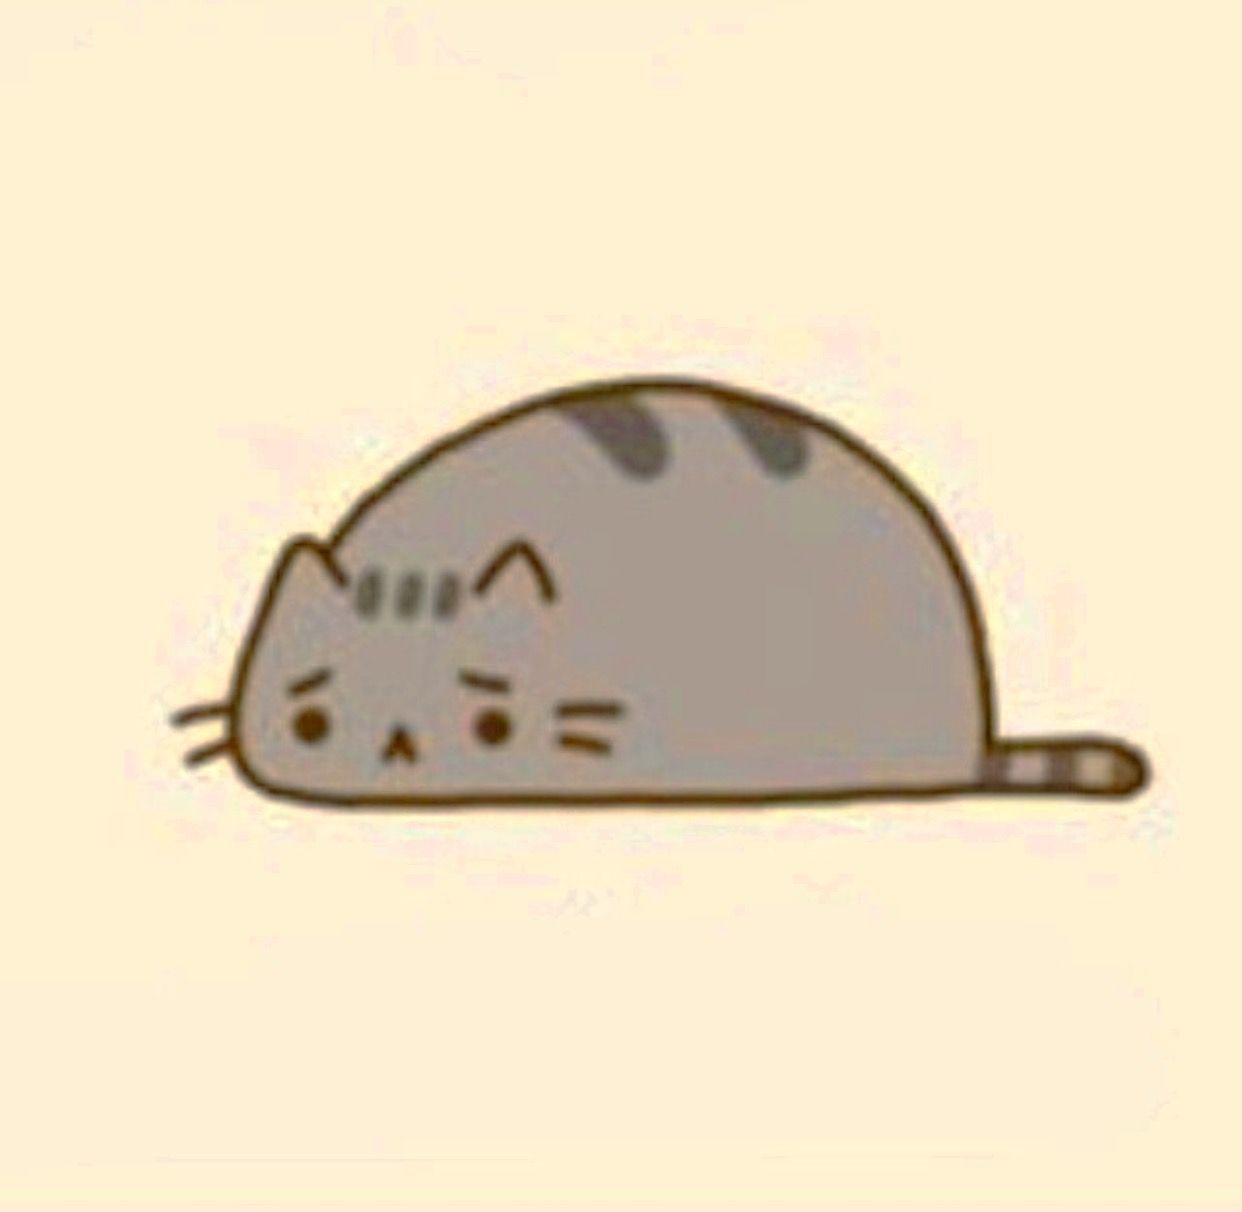 this is the saddest Pusheen I have ever seen. Pusheen cat